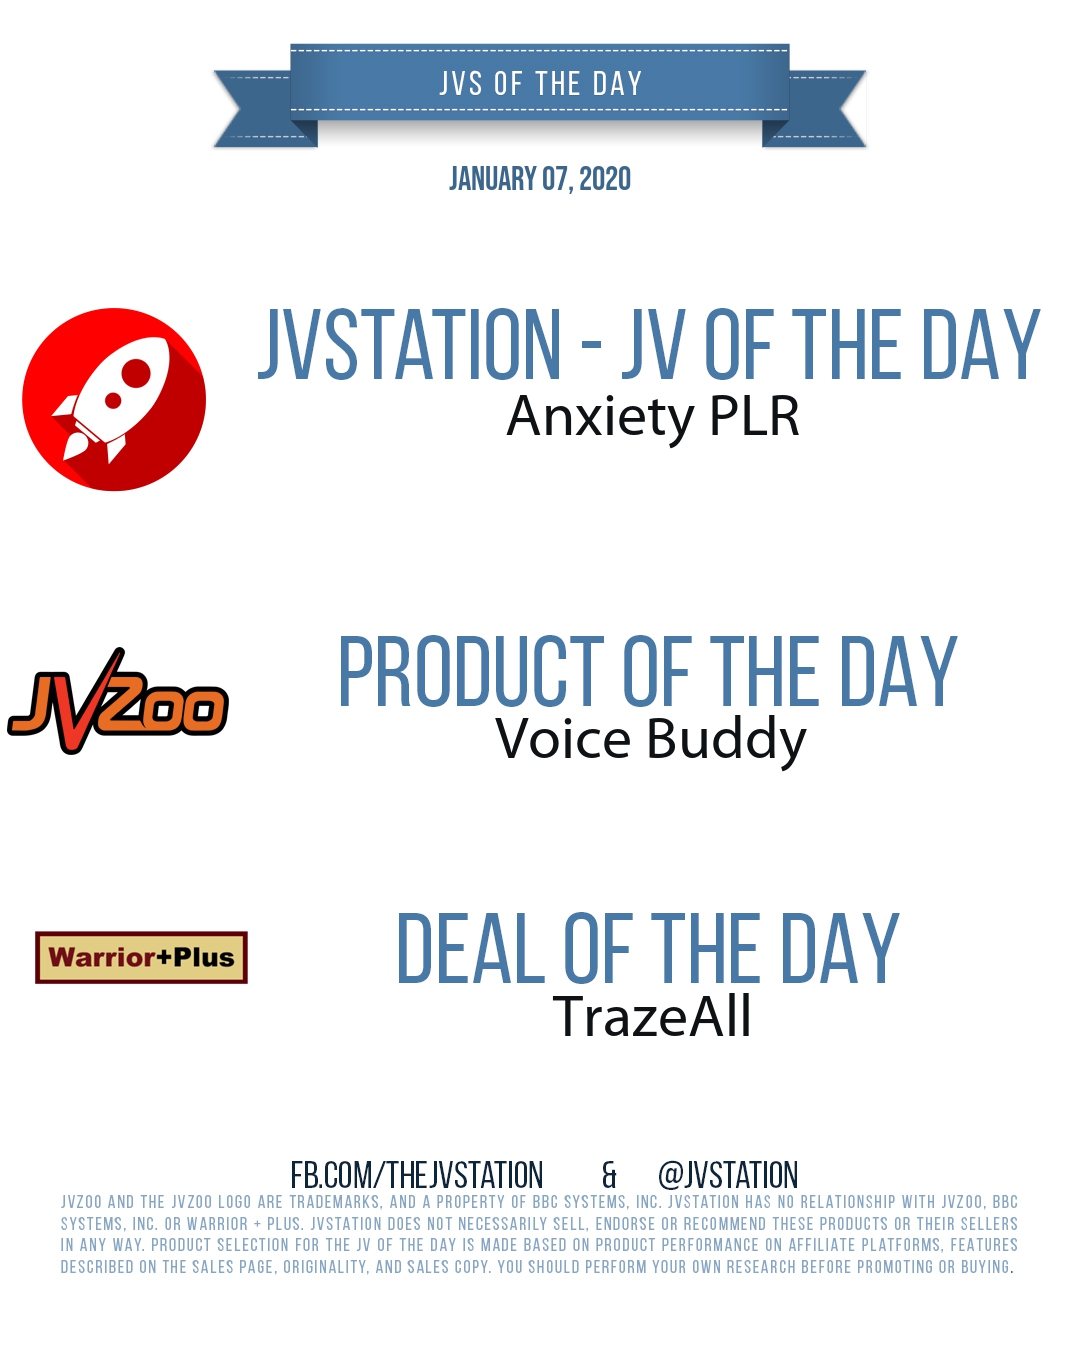 JVs of the day - January 07, 2020